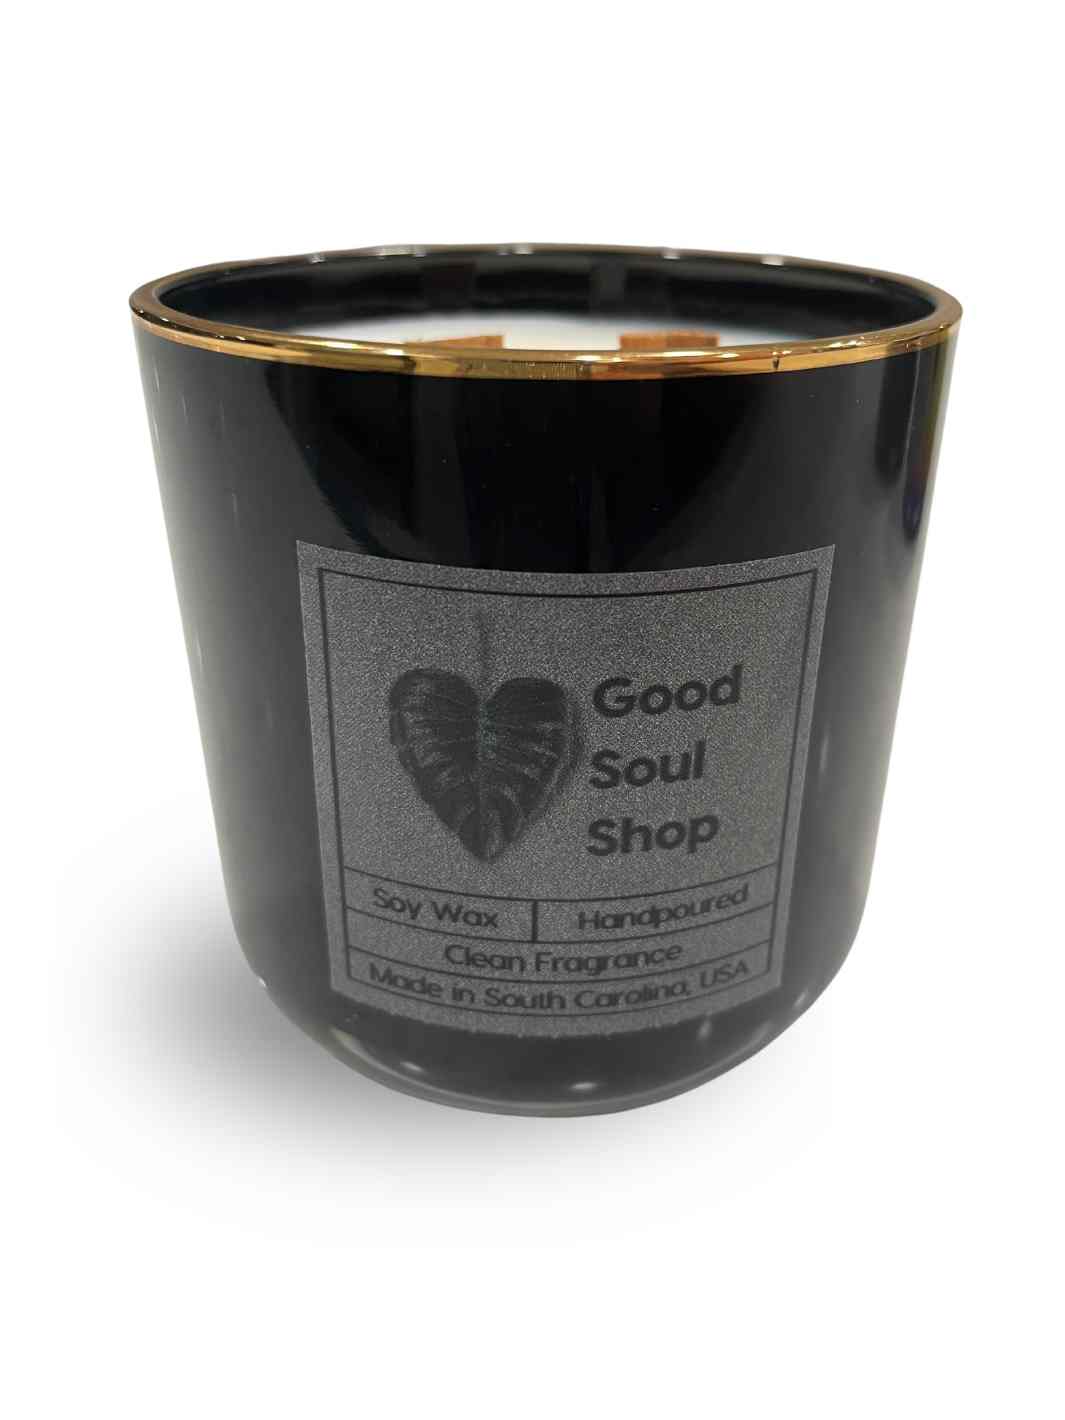 Good Soul Shop Handpoured Soy Double Wood Wick Candle Black Glass Gold Rim